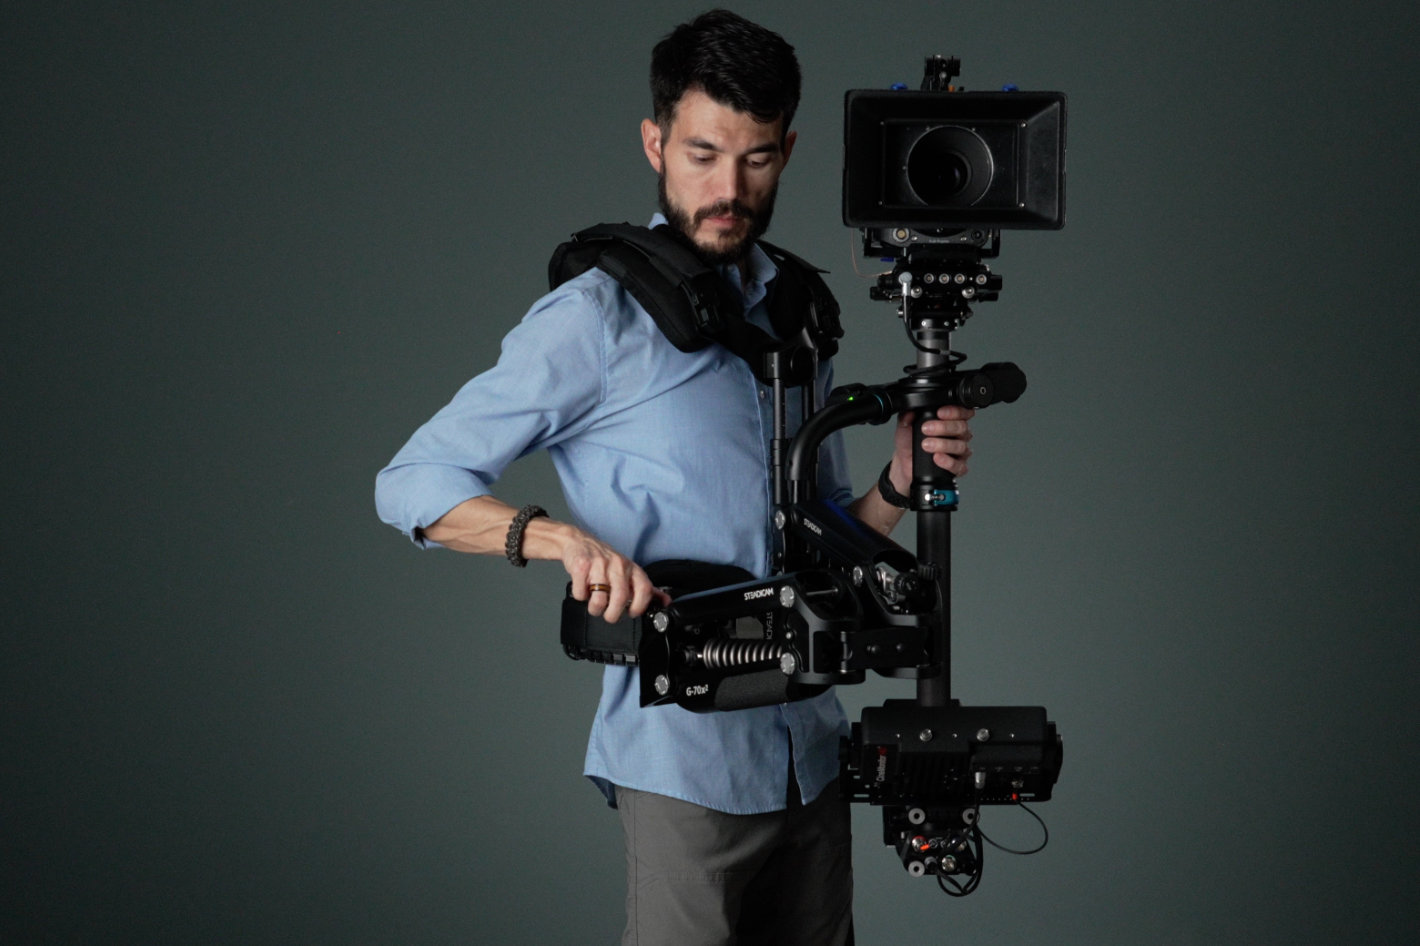 New Steadicam G-70x2 Arm for intuitive camera stabilization